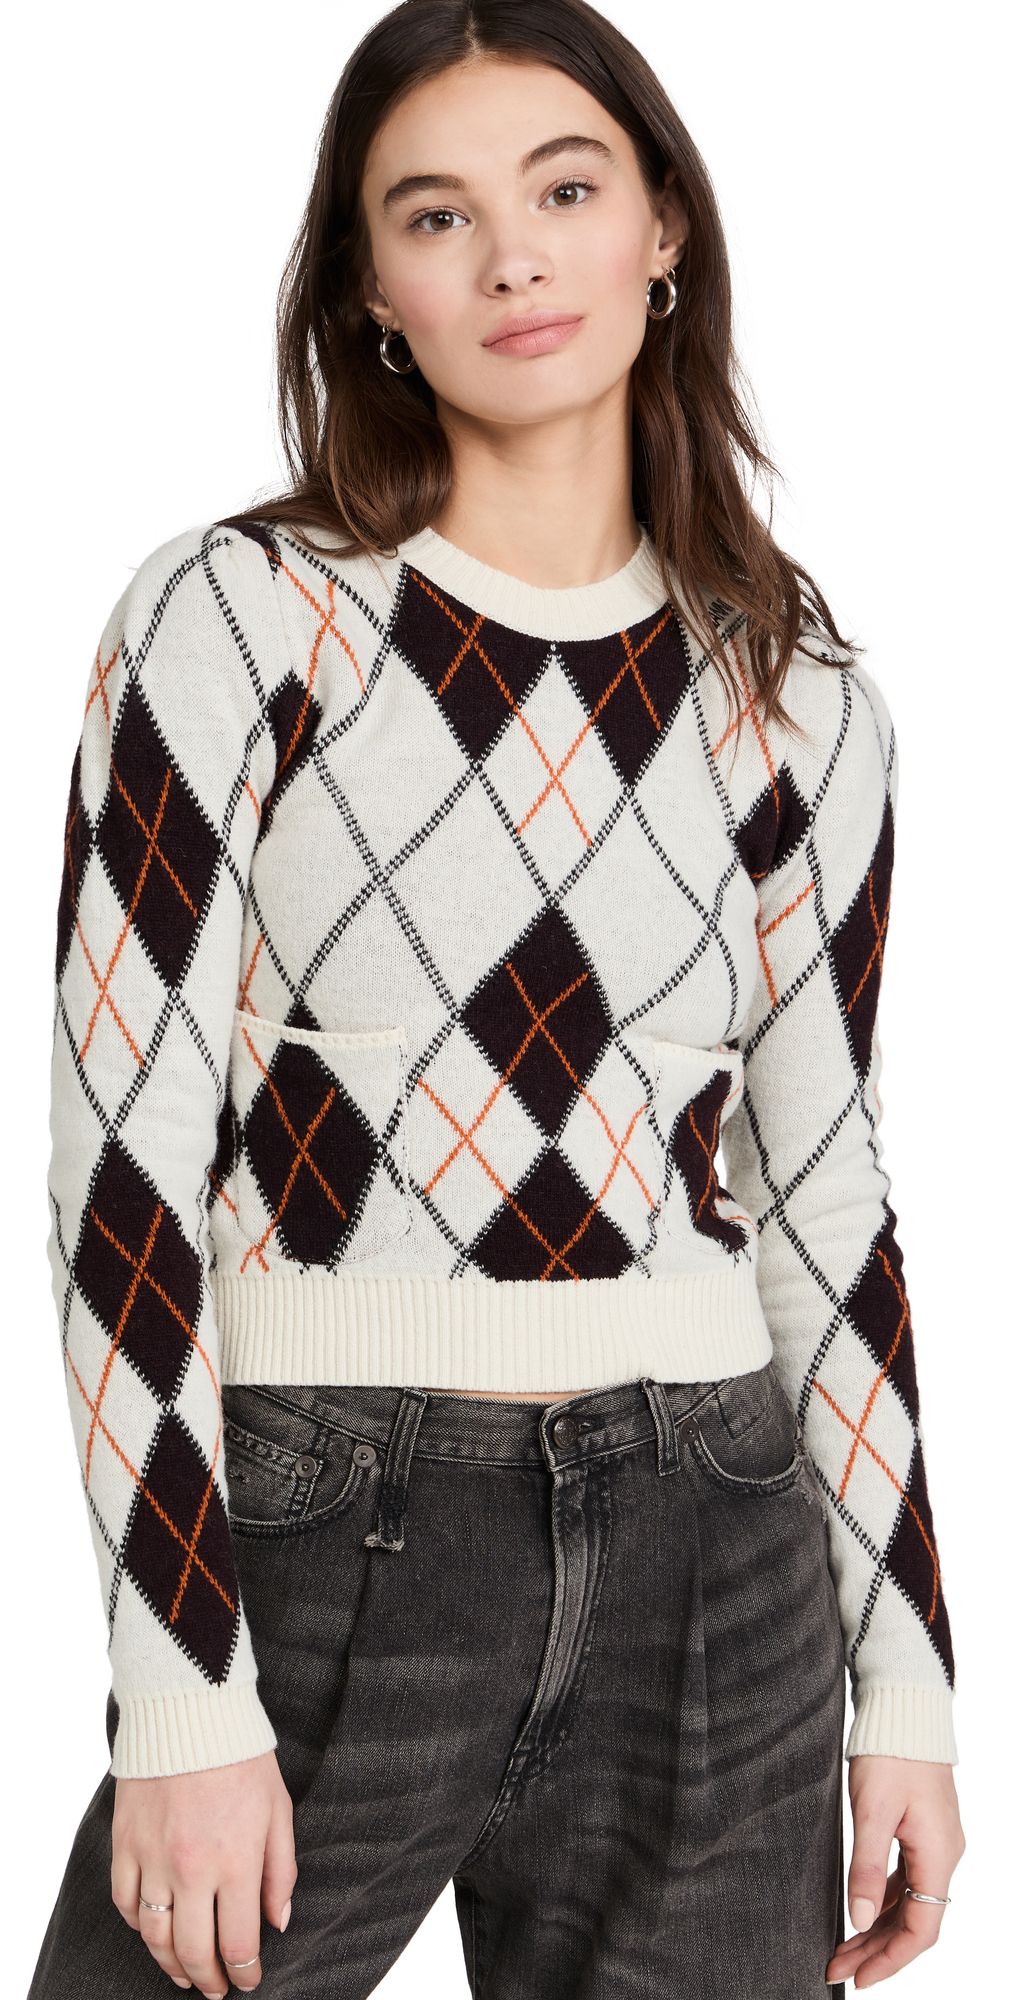 Harlequin Knit Cropped Sweater | Shopbop